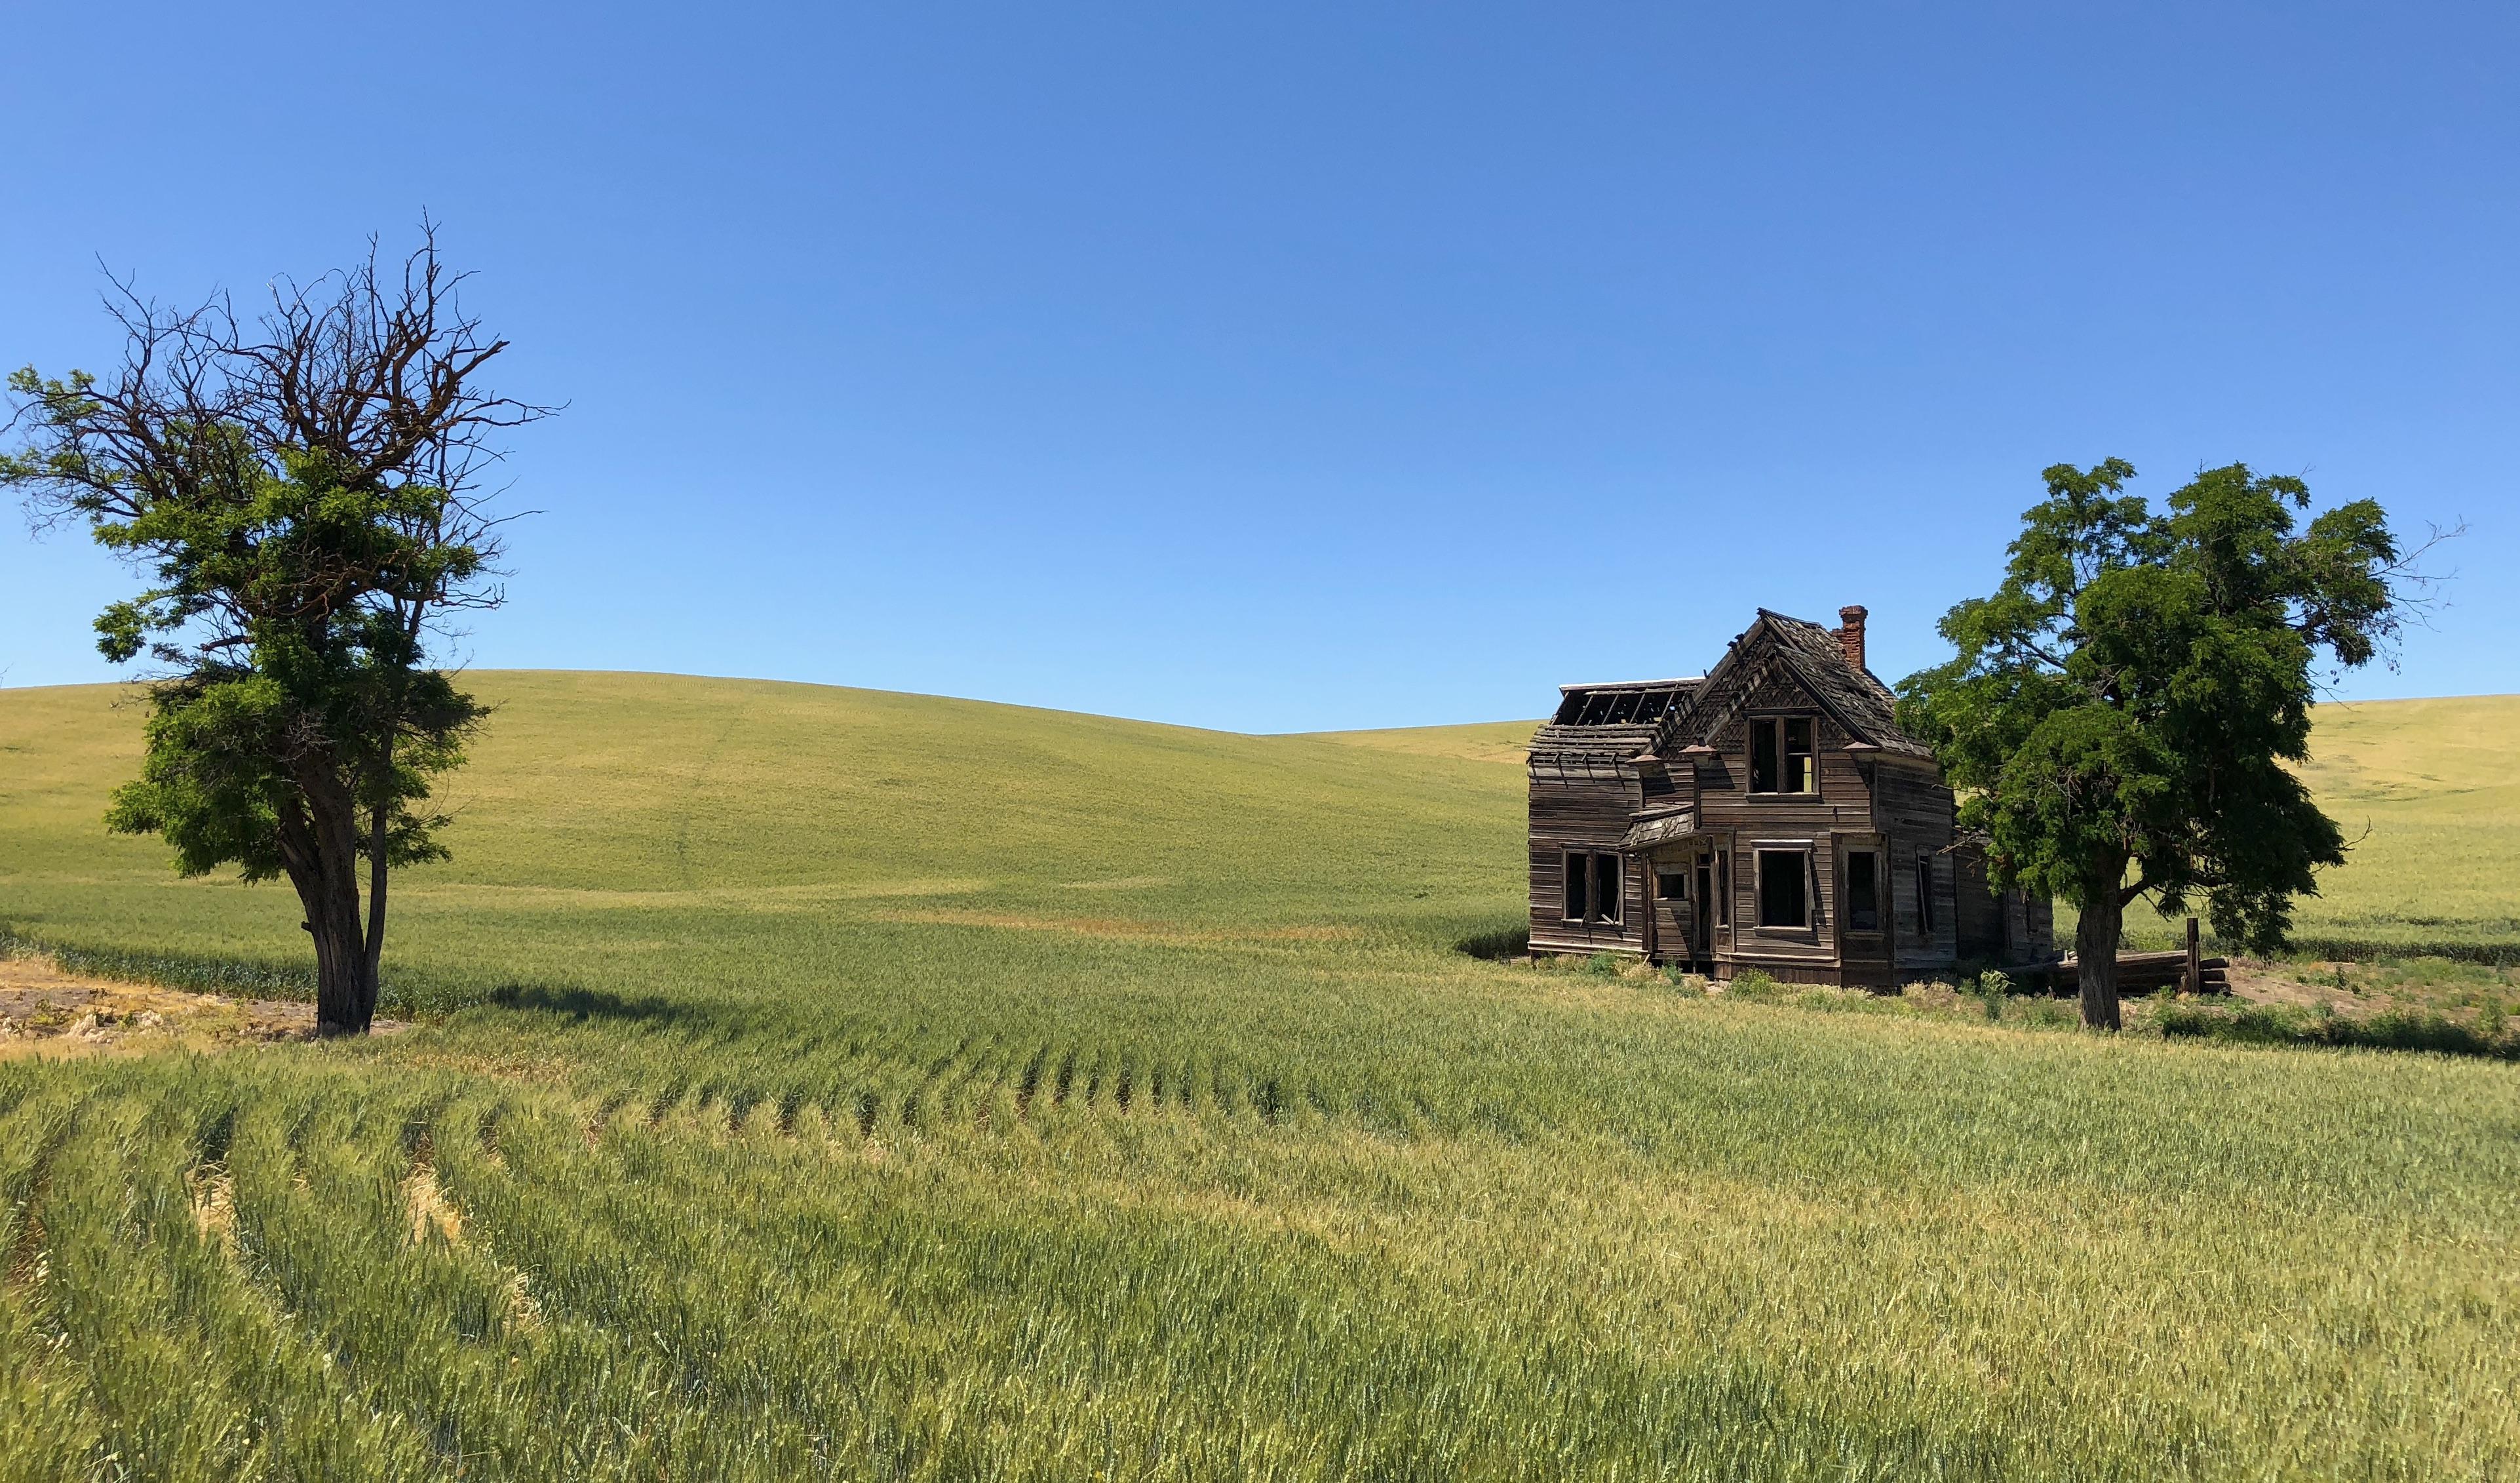 The Charles Nelson House sits alone in a field of wheat.